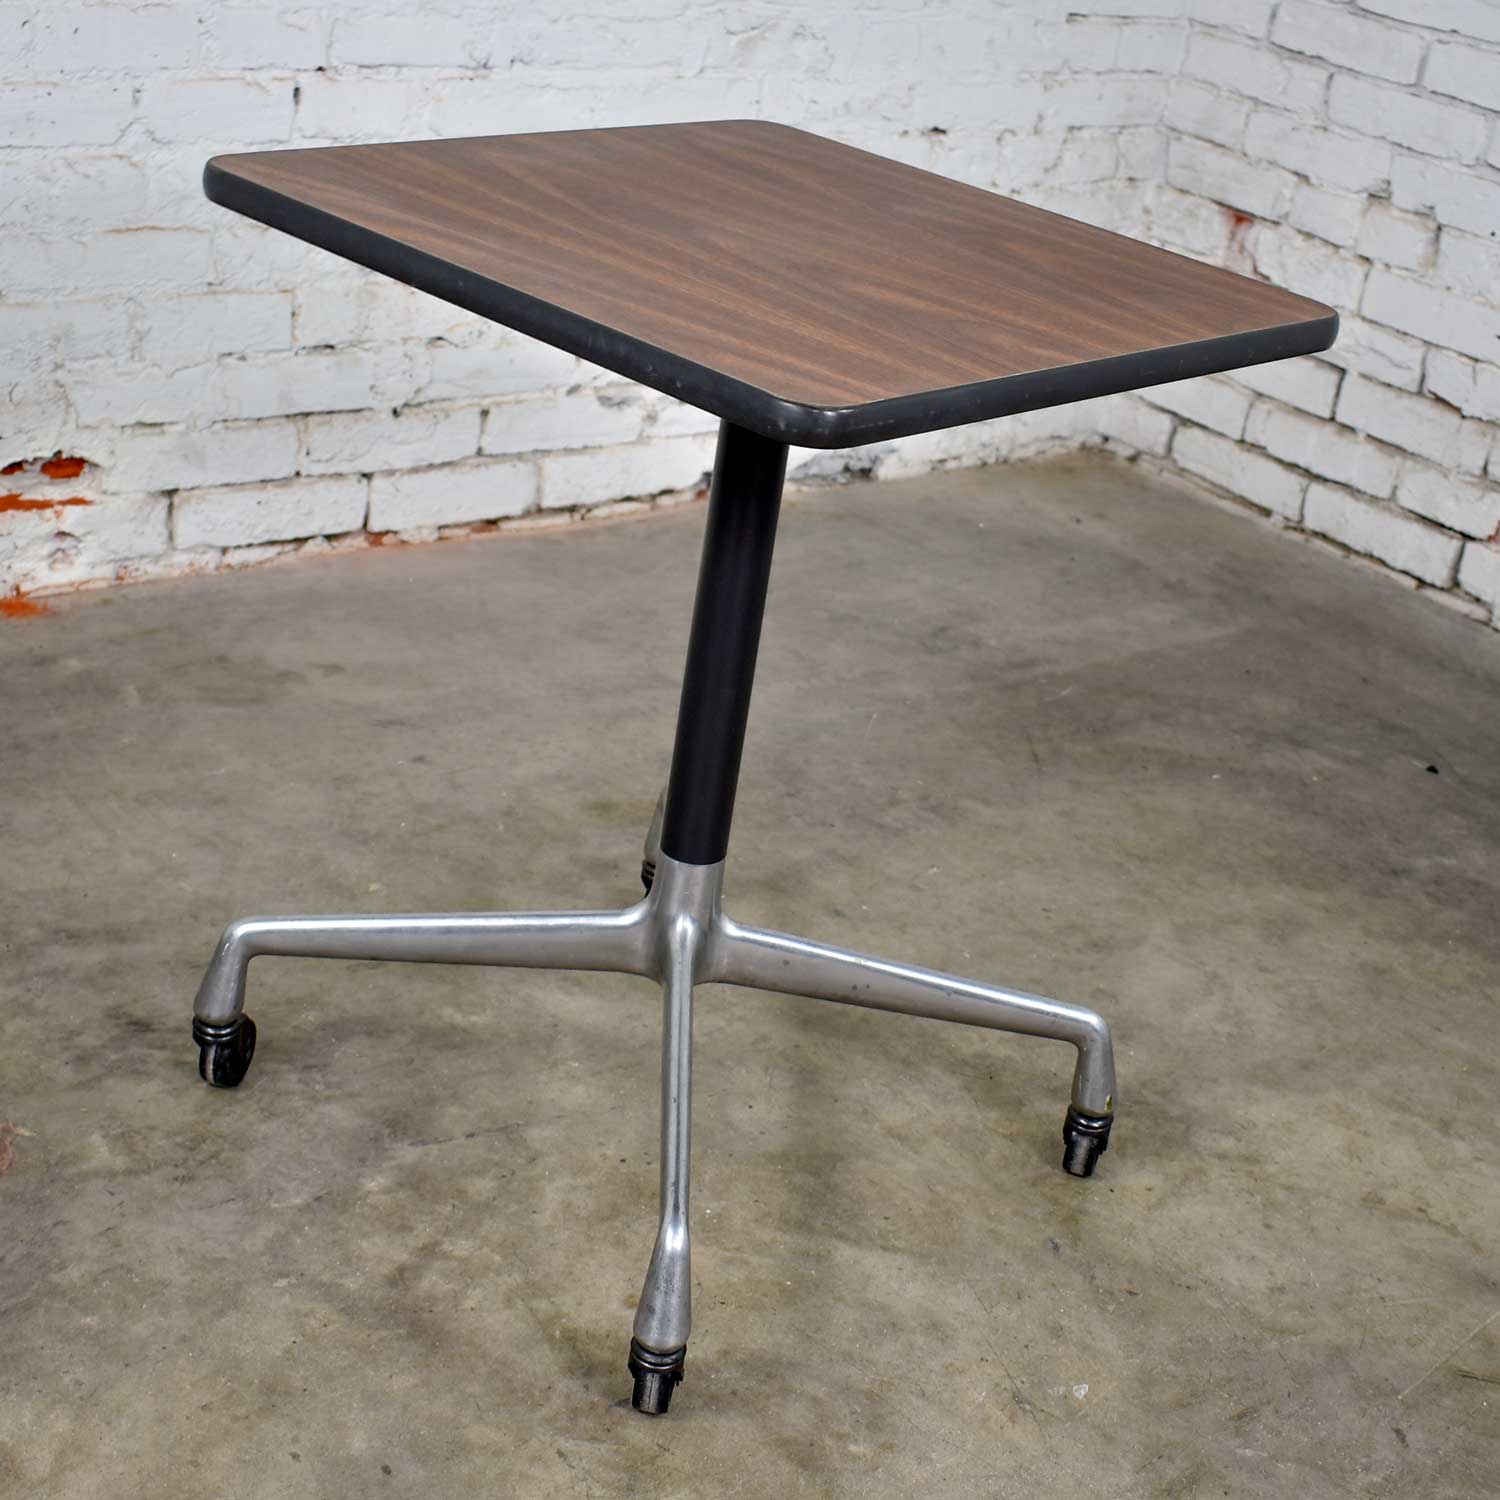 Vintage Eames for Herman Miller Square Rolling Side Table Universal Base Faux Wood Grain Laminate Top